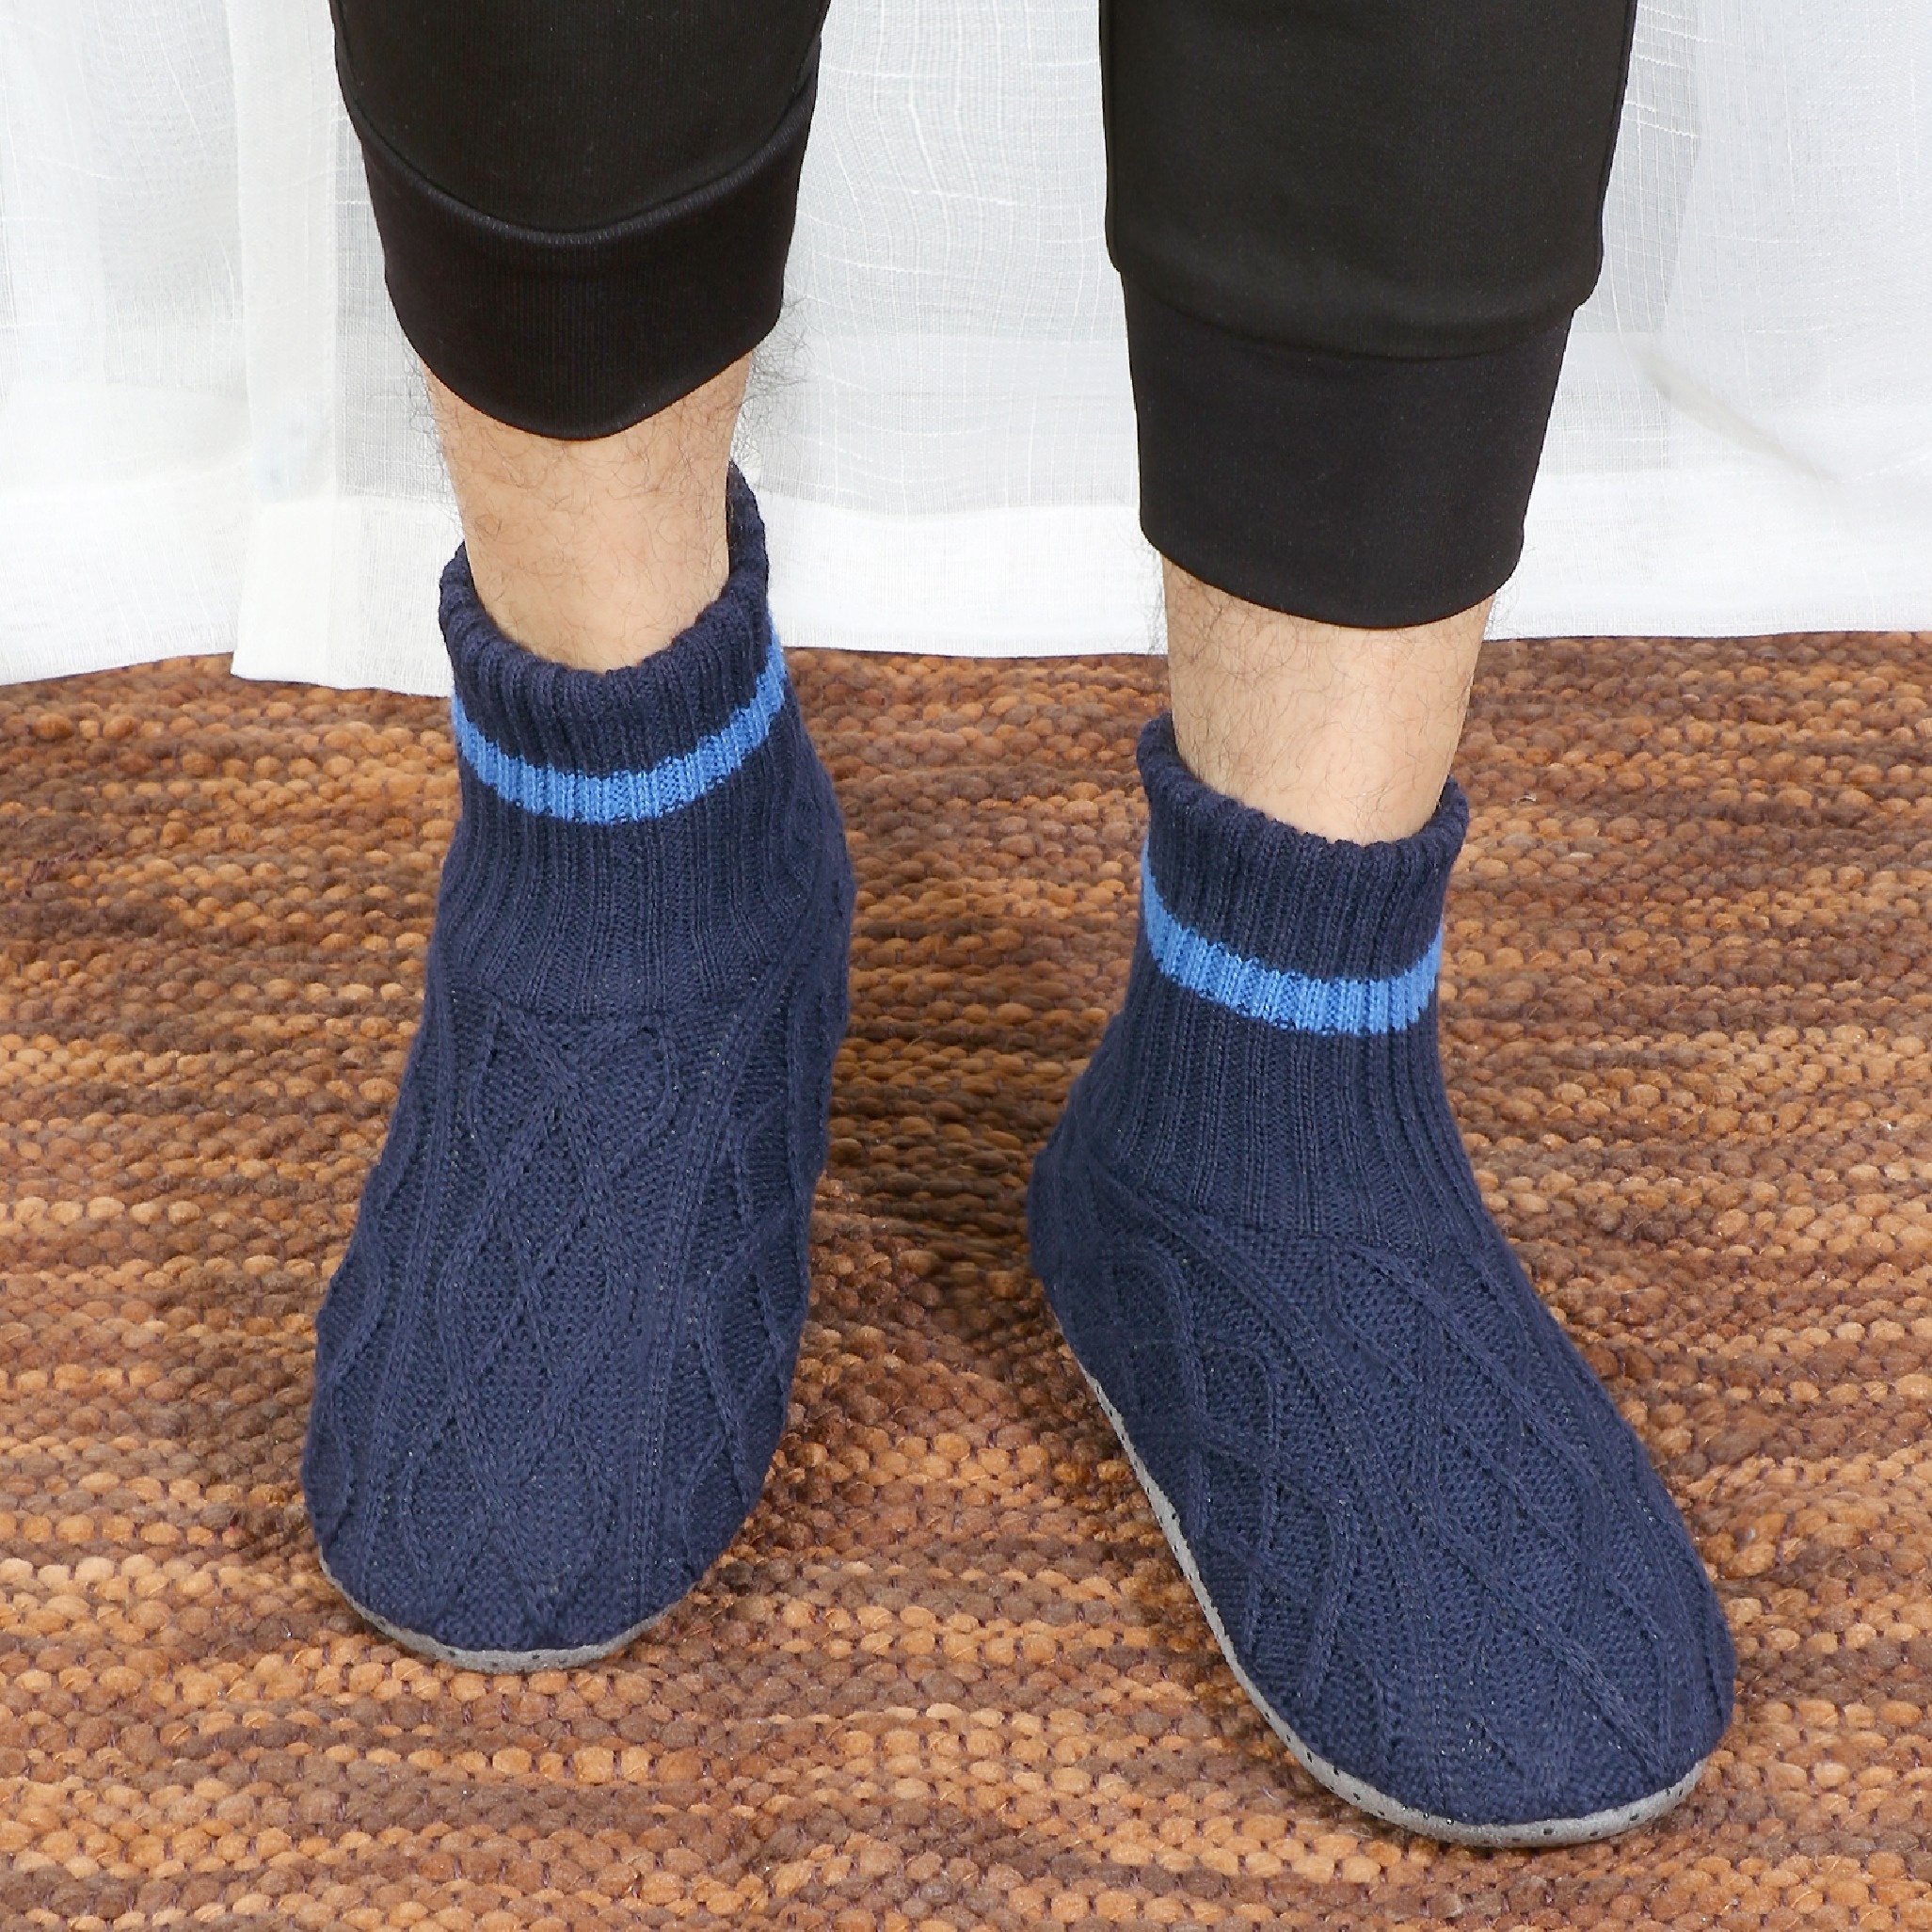 Mens Fabric Socks Slipper Soft Cozy Thick House Indoor Boot Sock